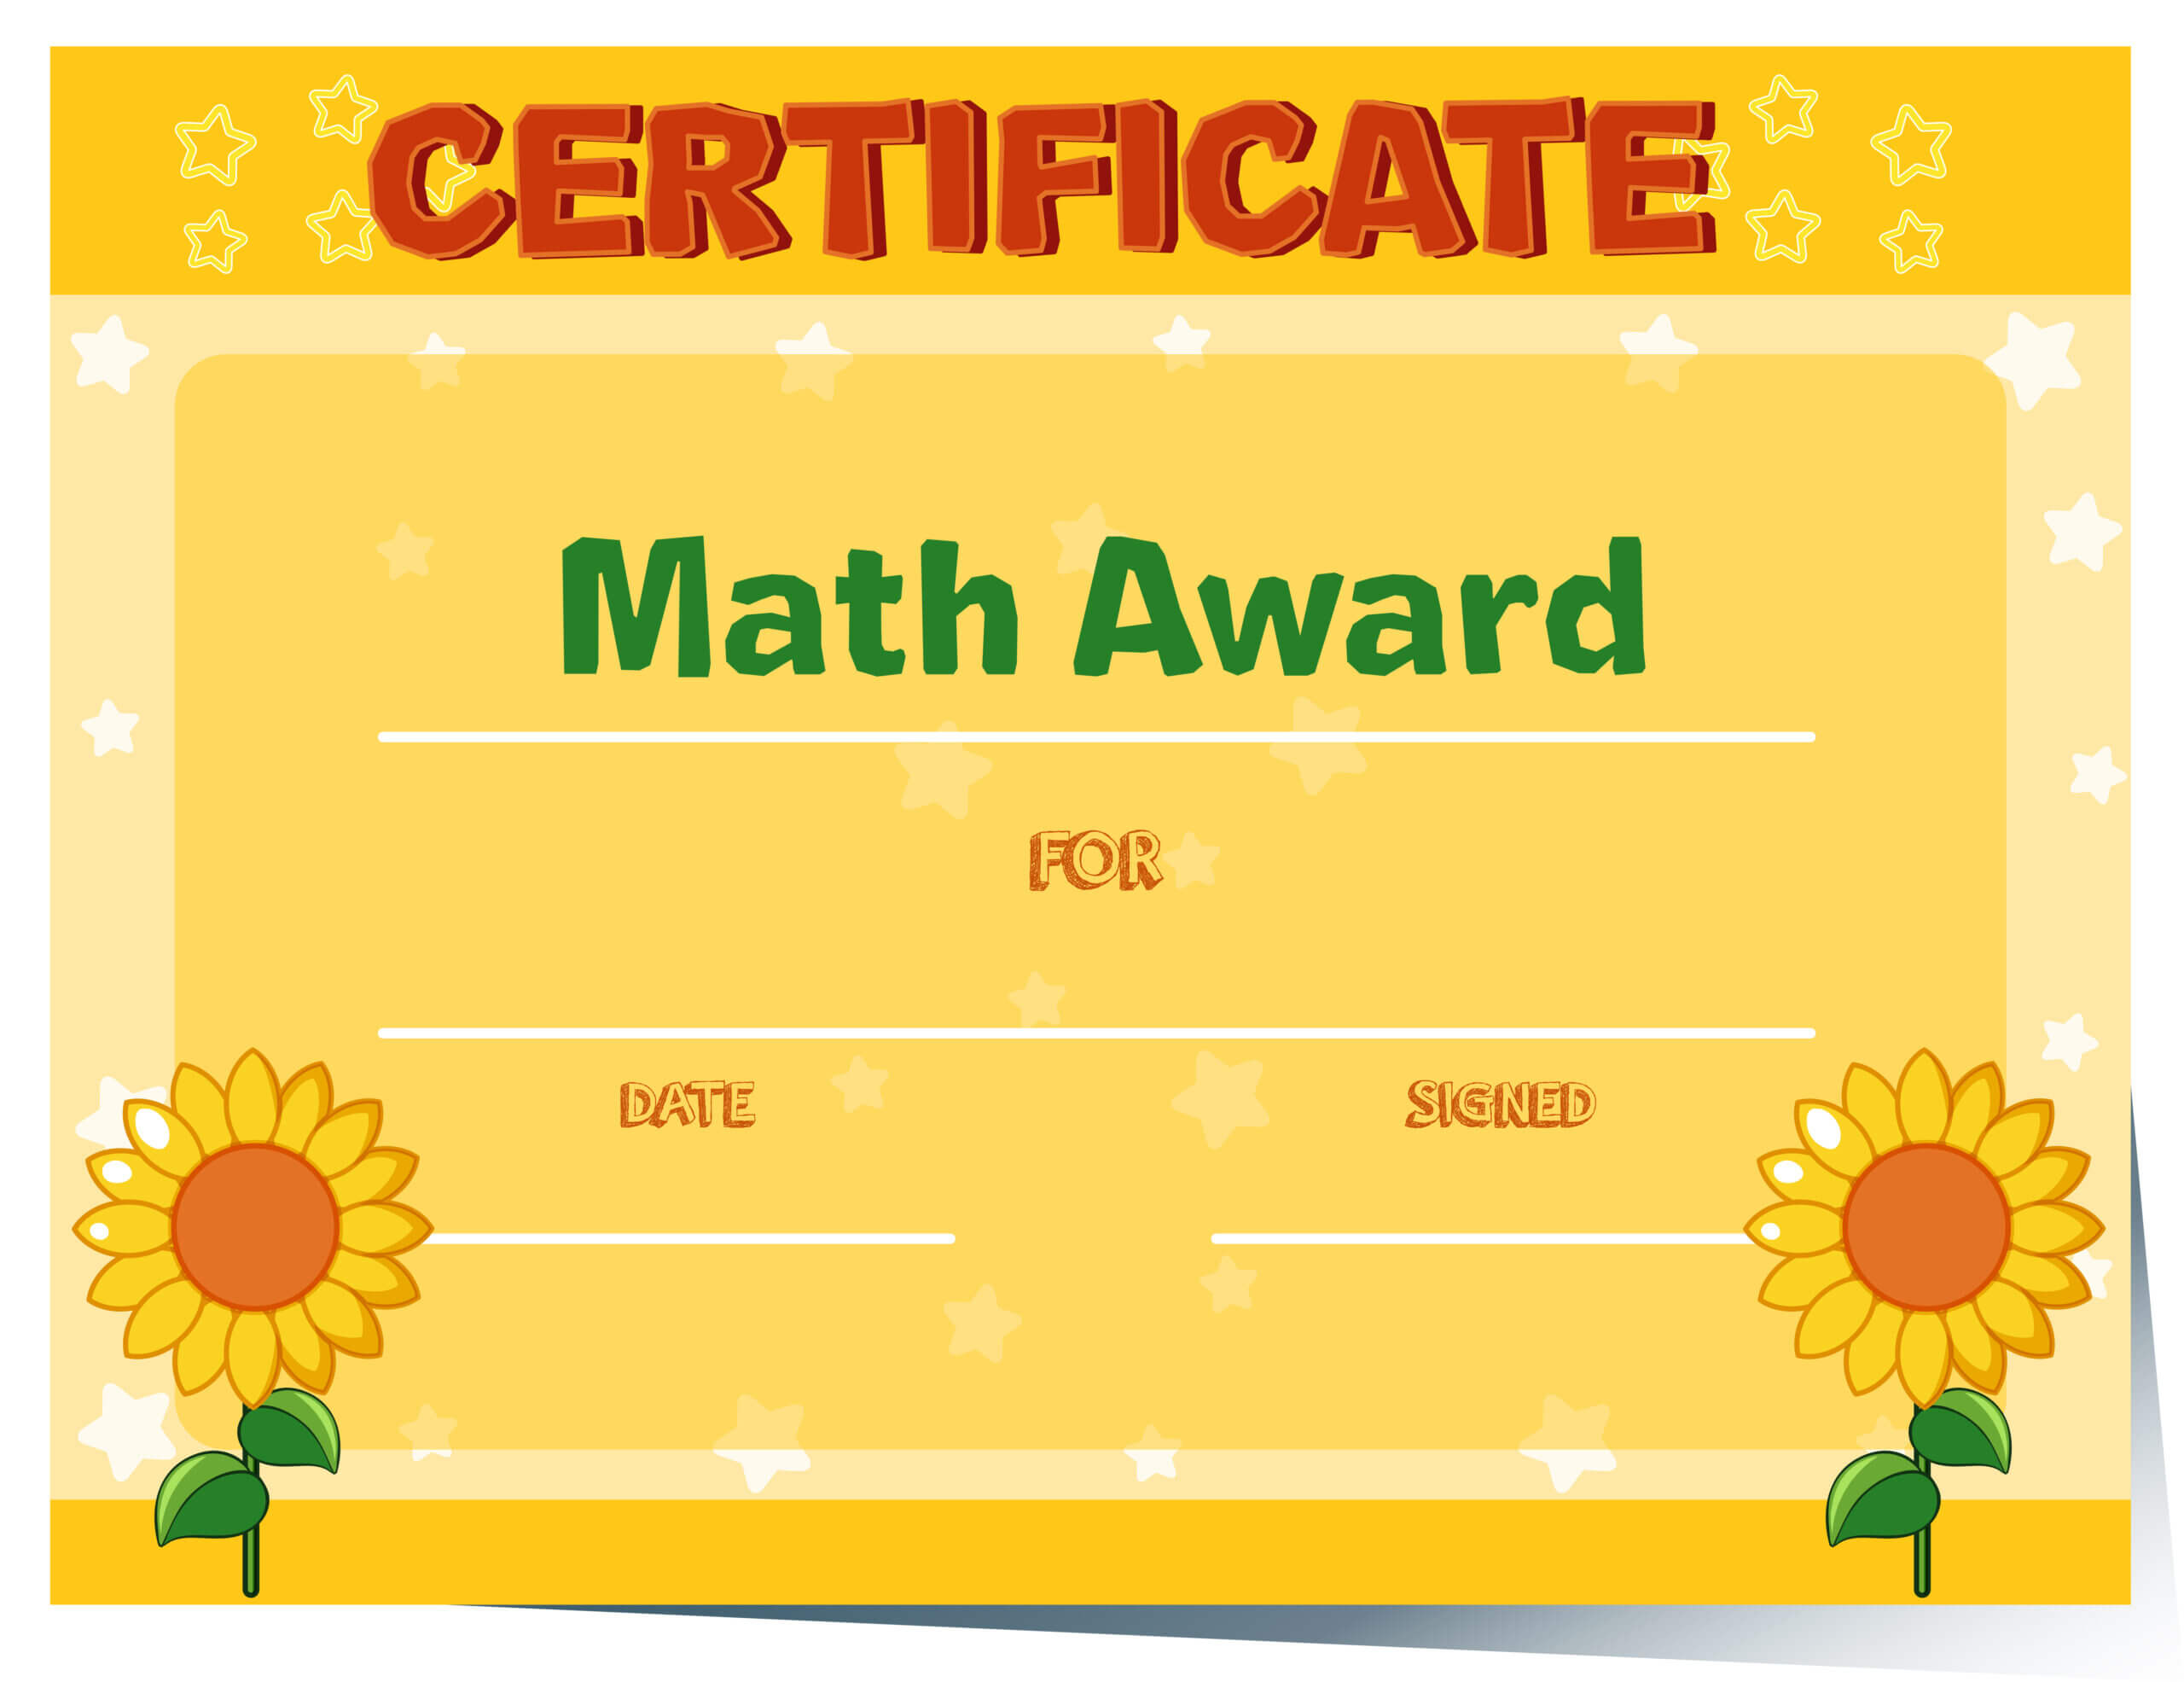 Certificate Template With Sunflowers In Background With Math Certificate Template